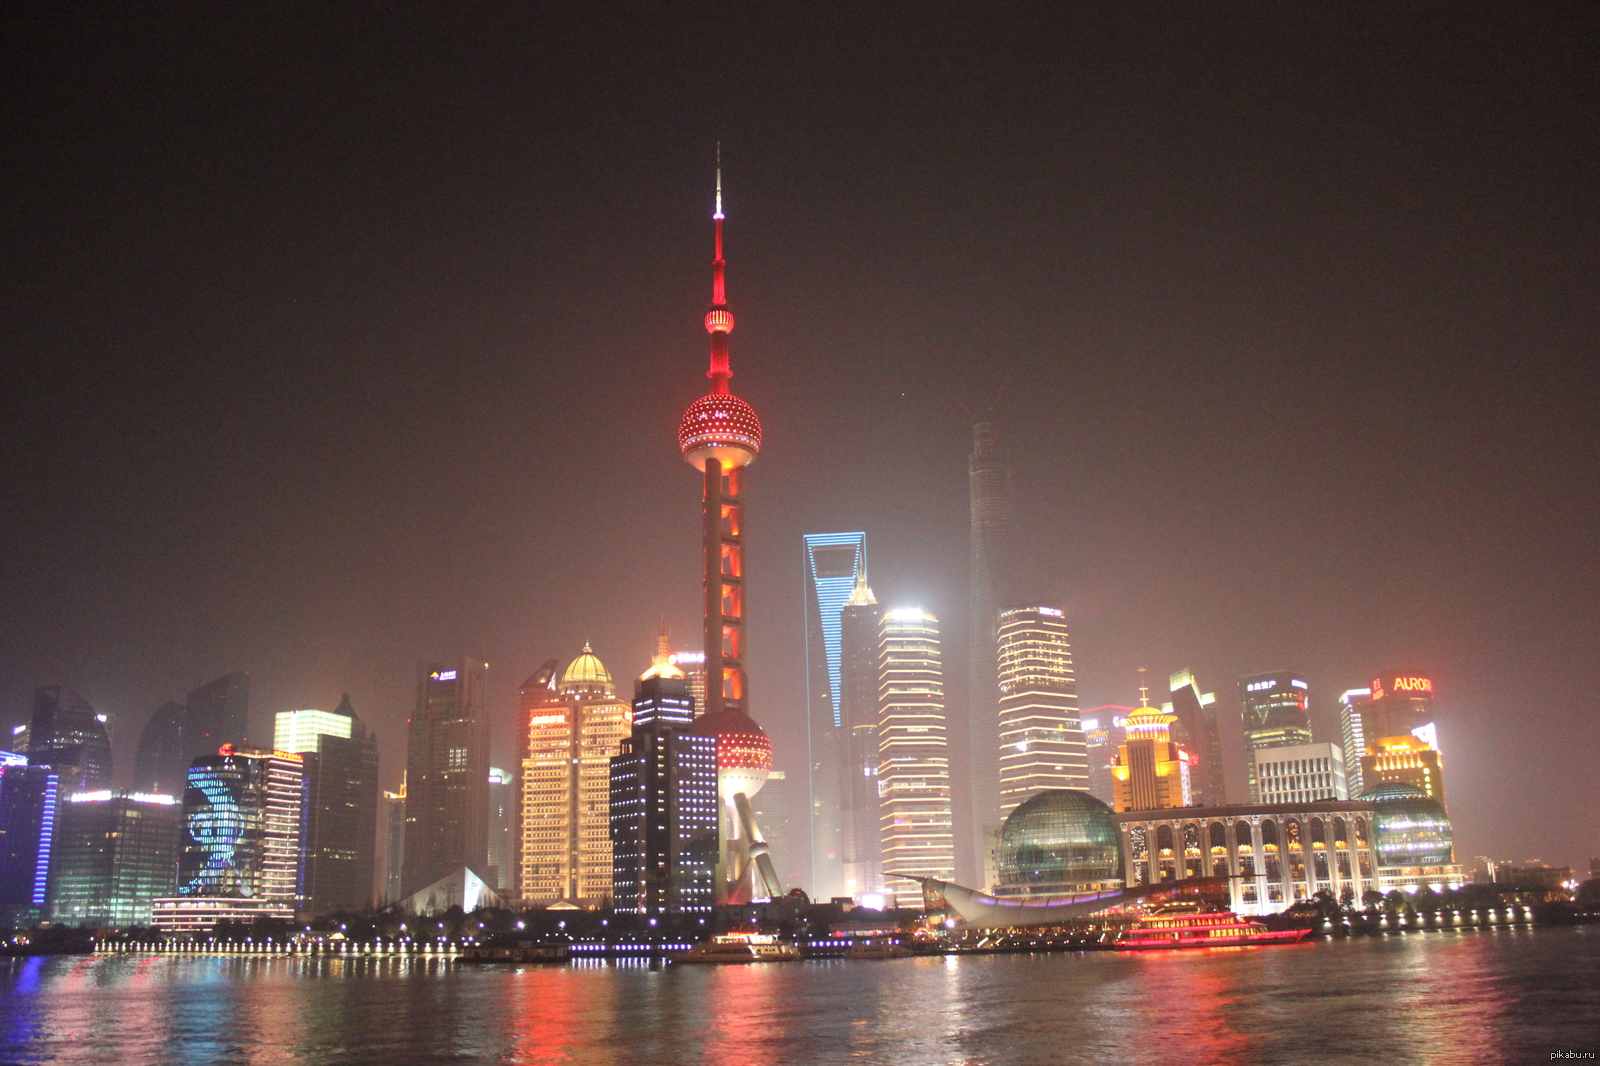 I had a chance to visit Shanghai, look at the Huangpu River and the Pearl of the East - My, Shanghai, shanghai tower, Pearl of the East, The photo